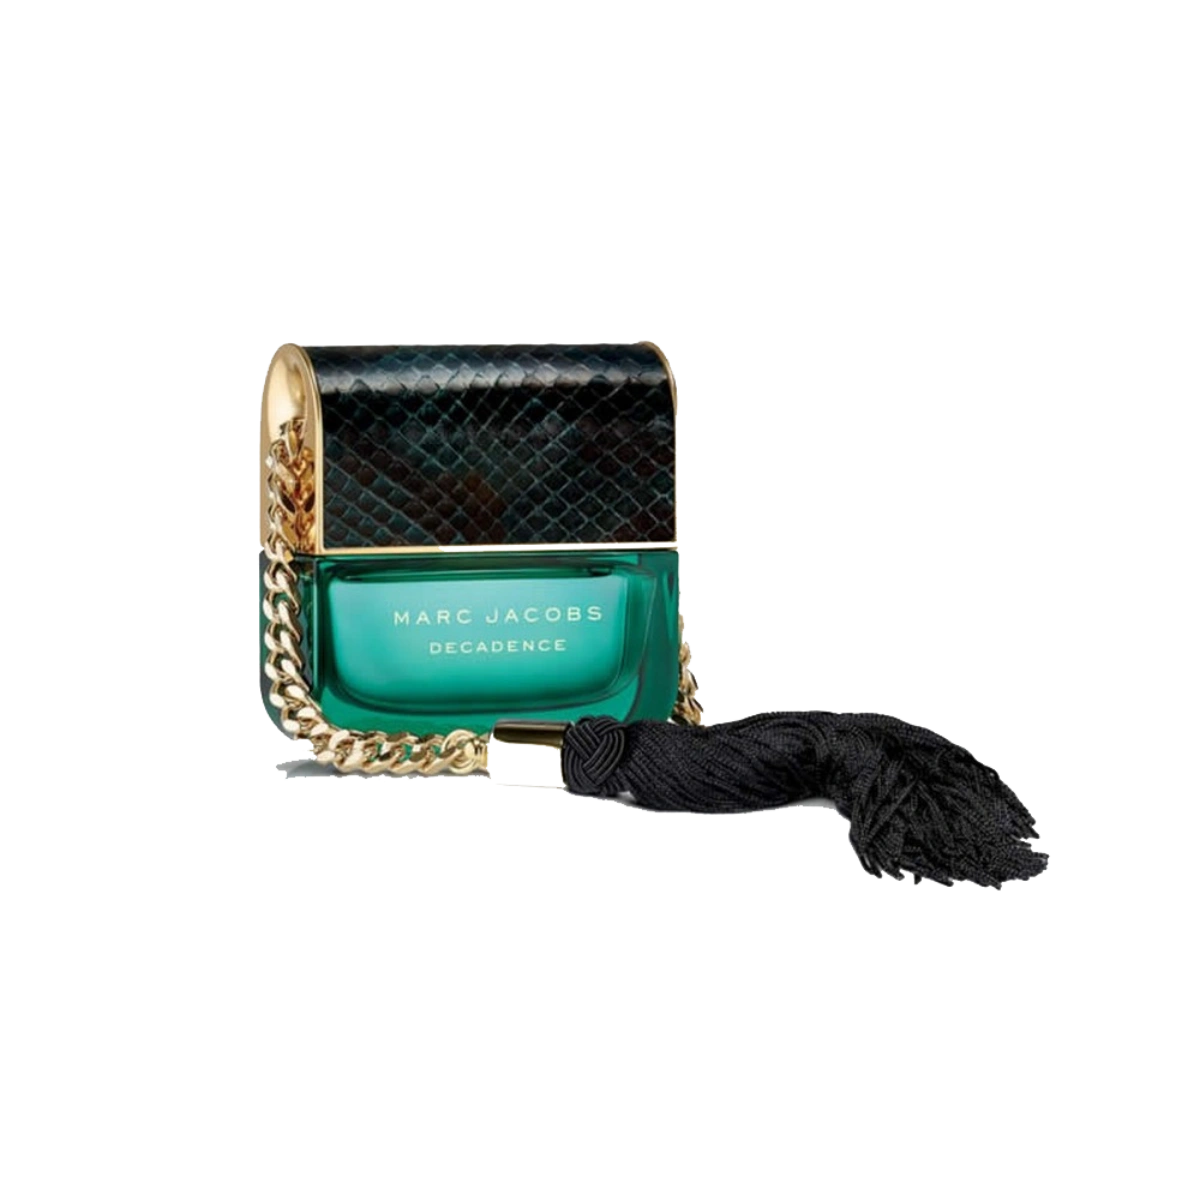 Elegant bottle of Marc Jacobs' Decadence with a dark green, python-textured surface and gold chain.